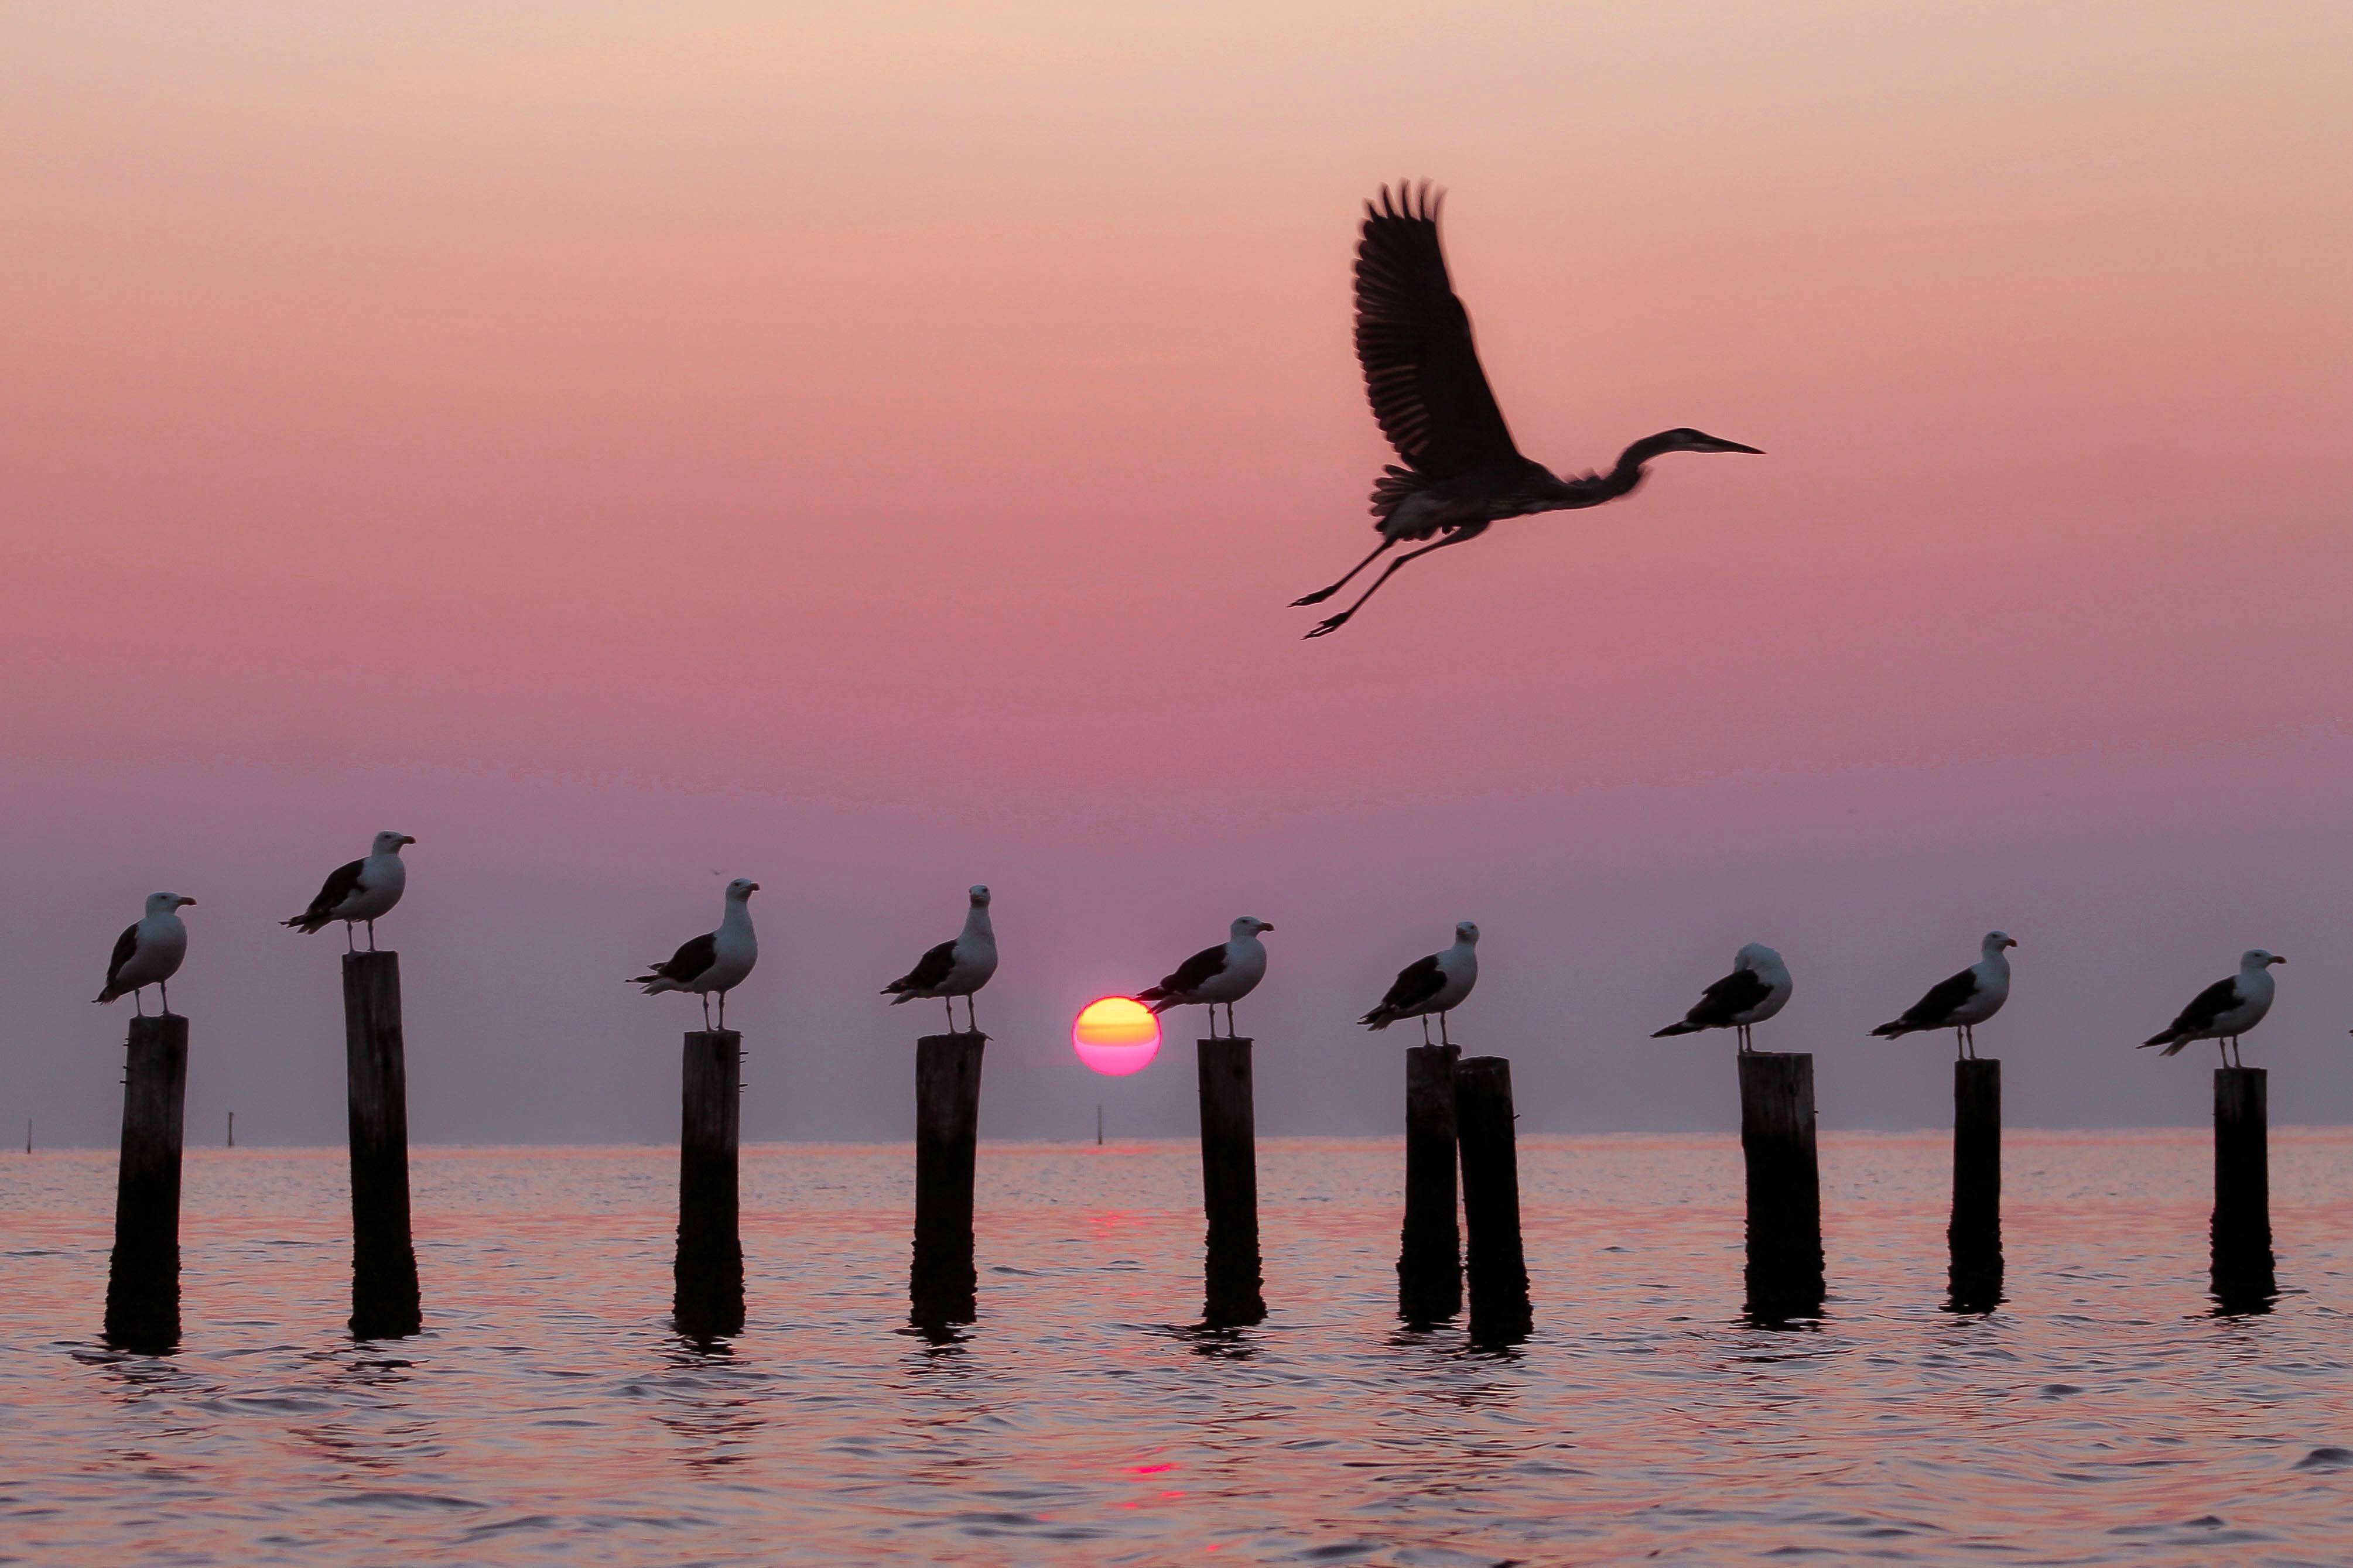 Took this picture of morning rush hour on the Chesapeake Bay